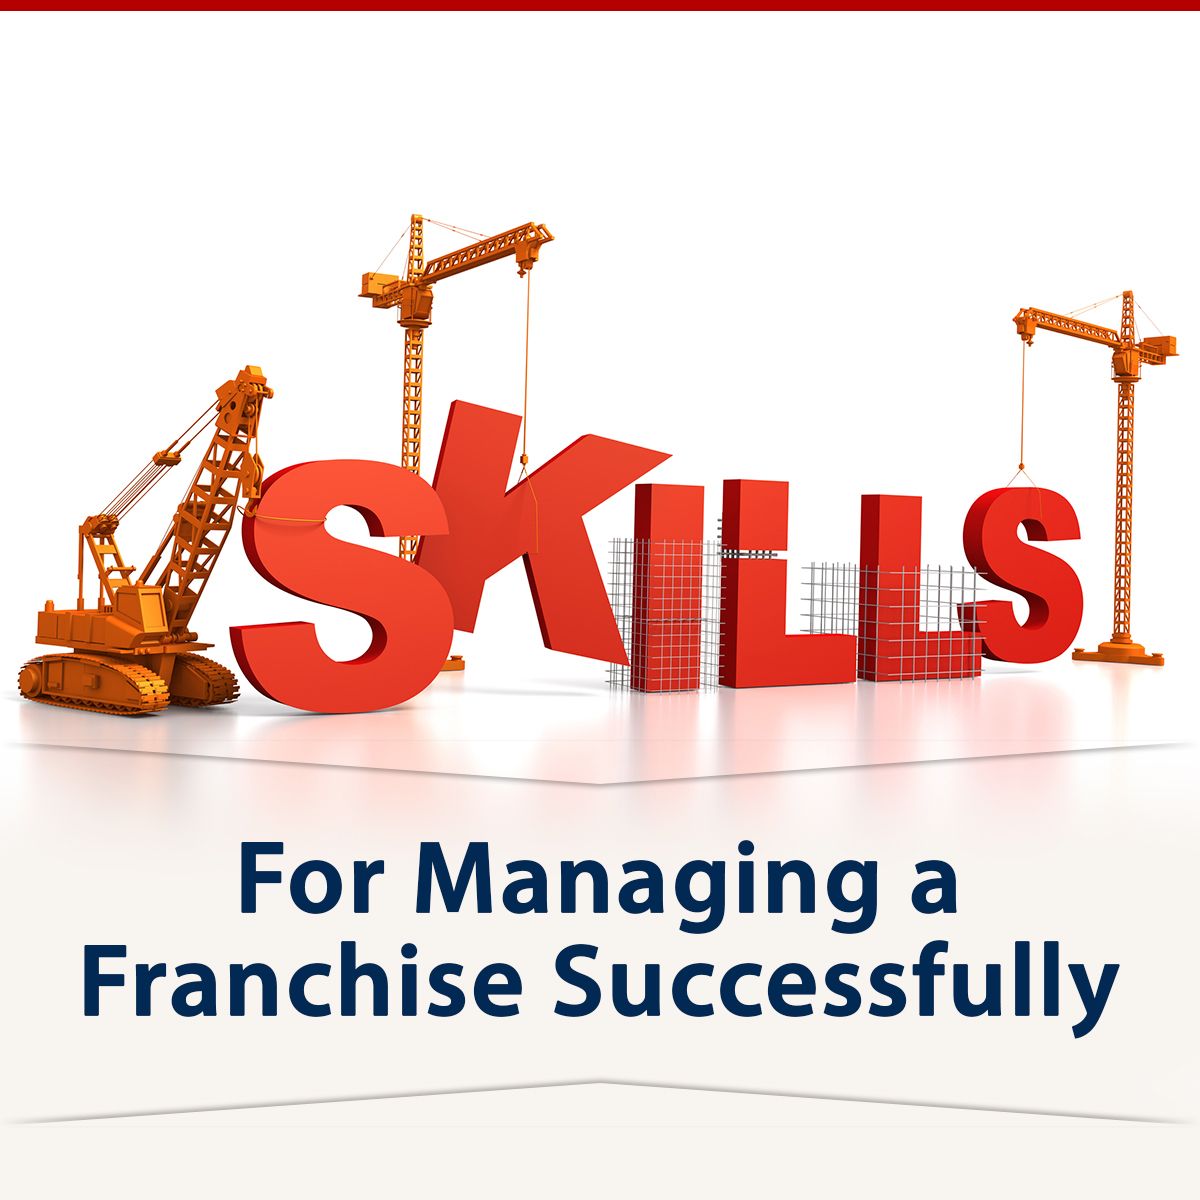 Skills For Managing a Franchise Successfully